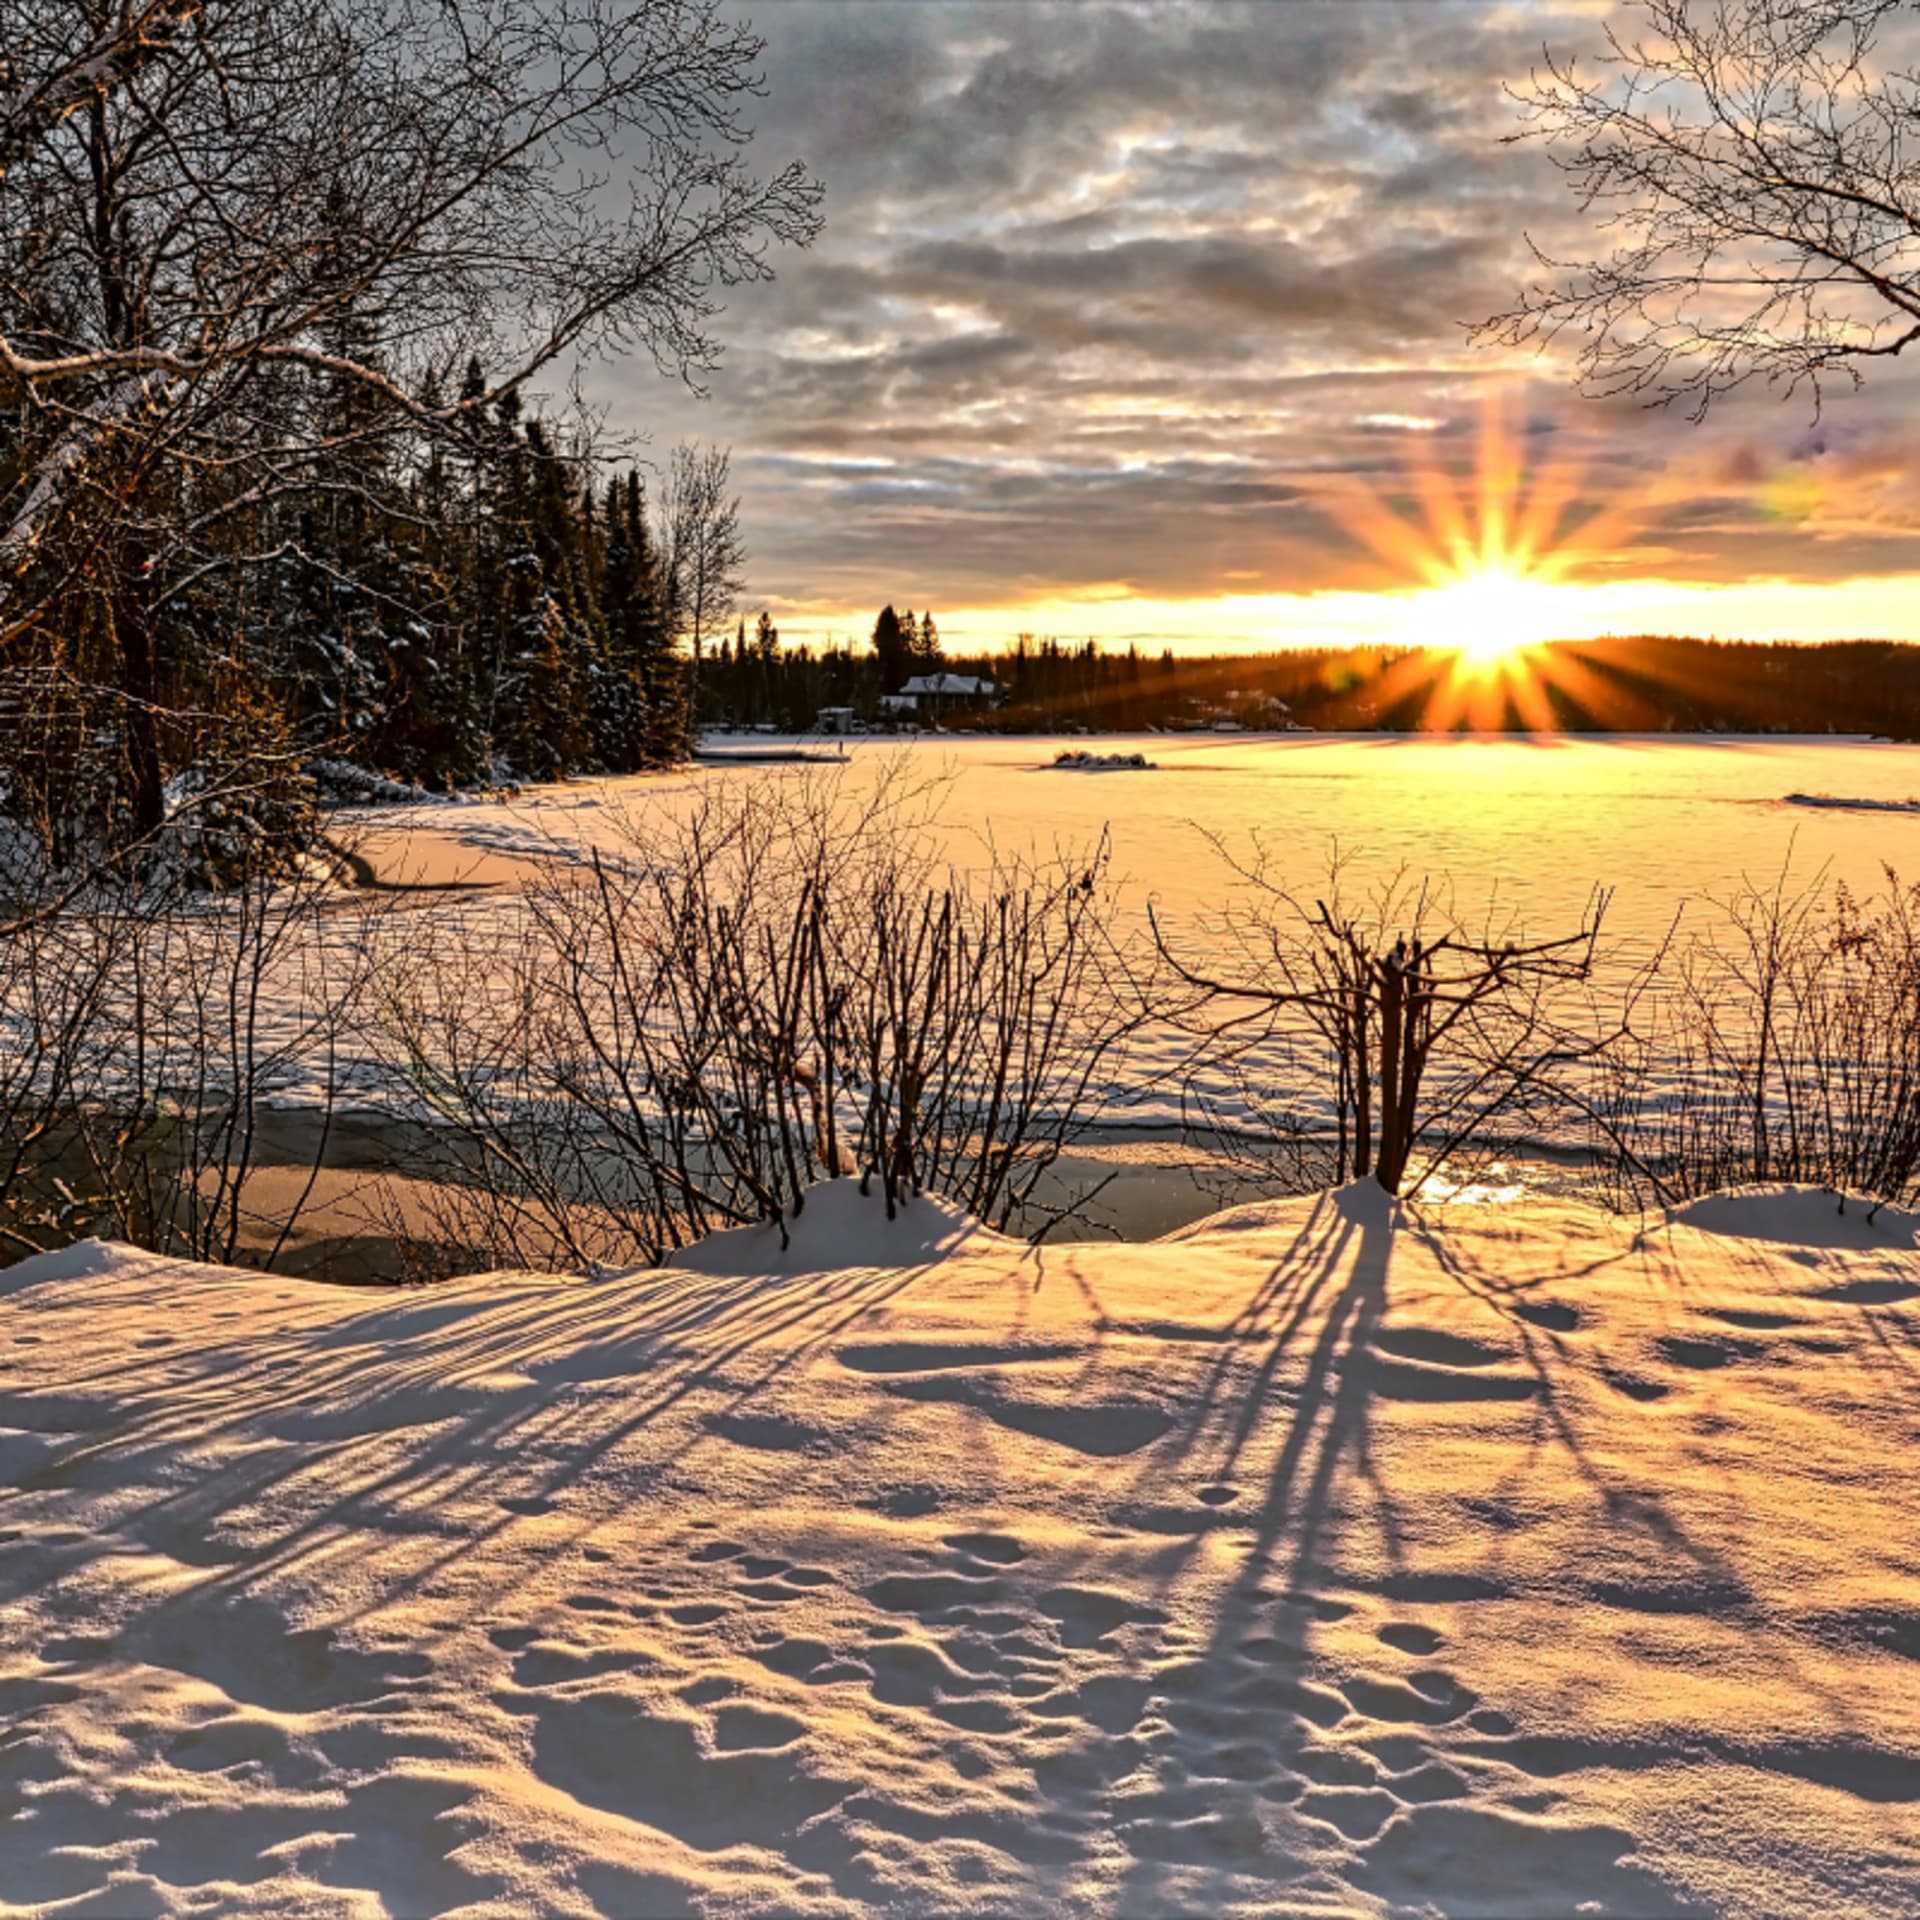 Sunset over frozen lake in Finland